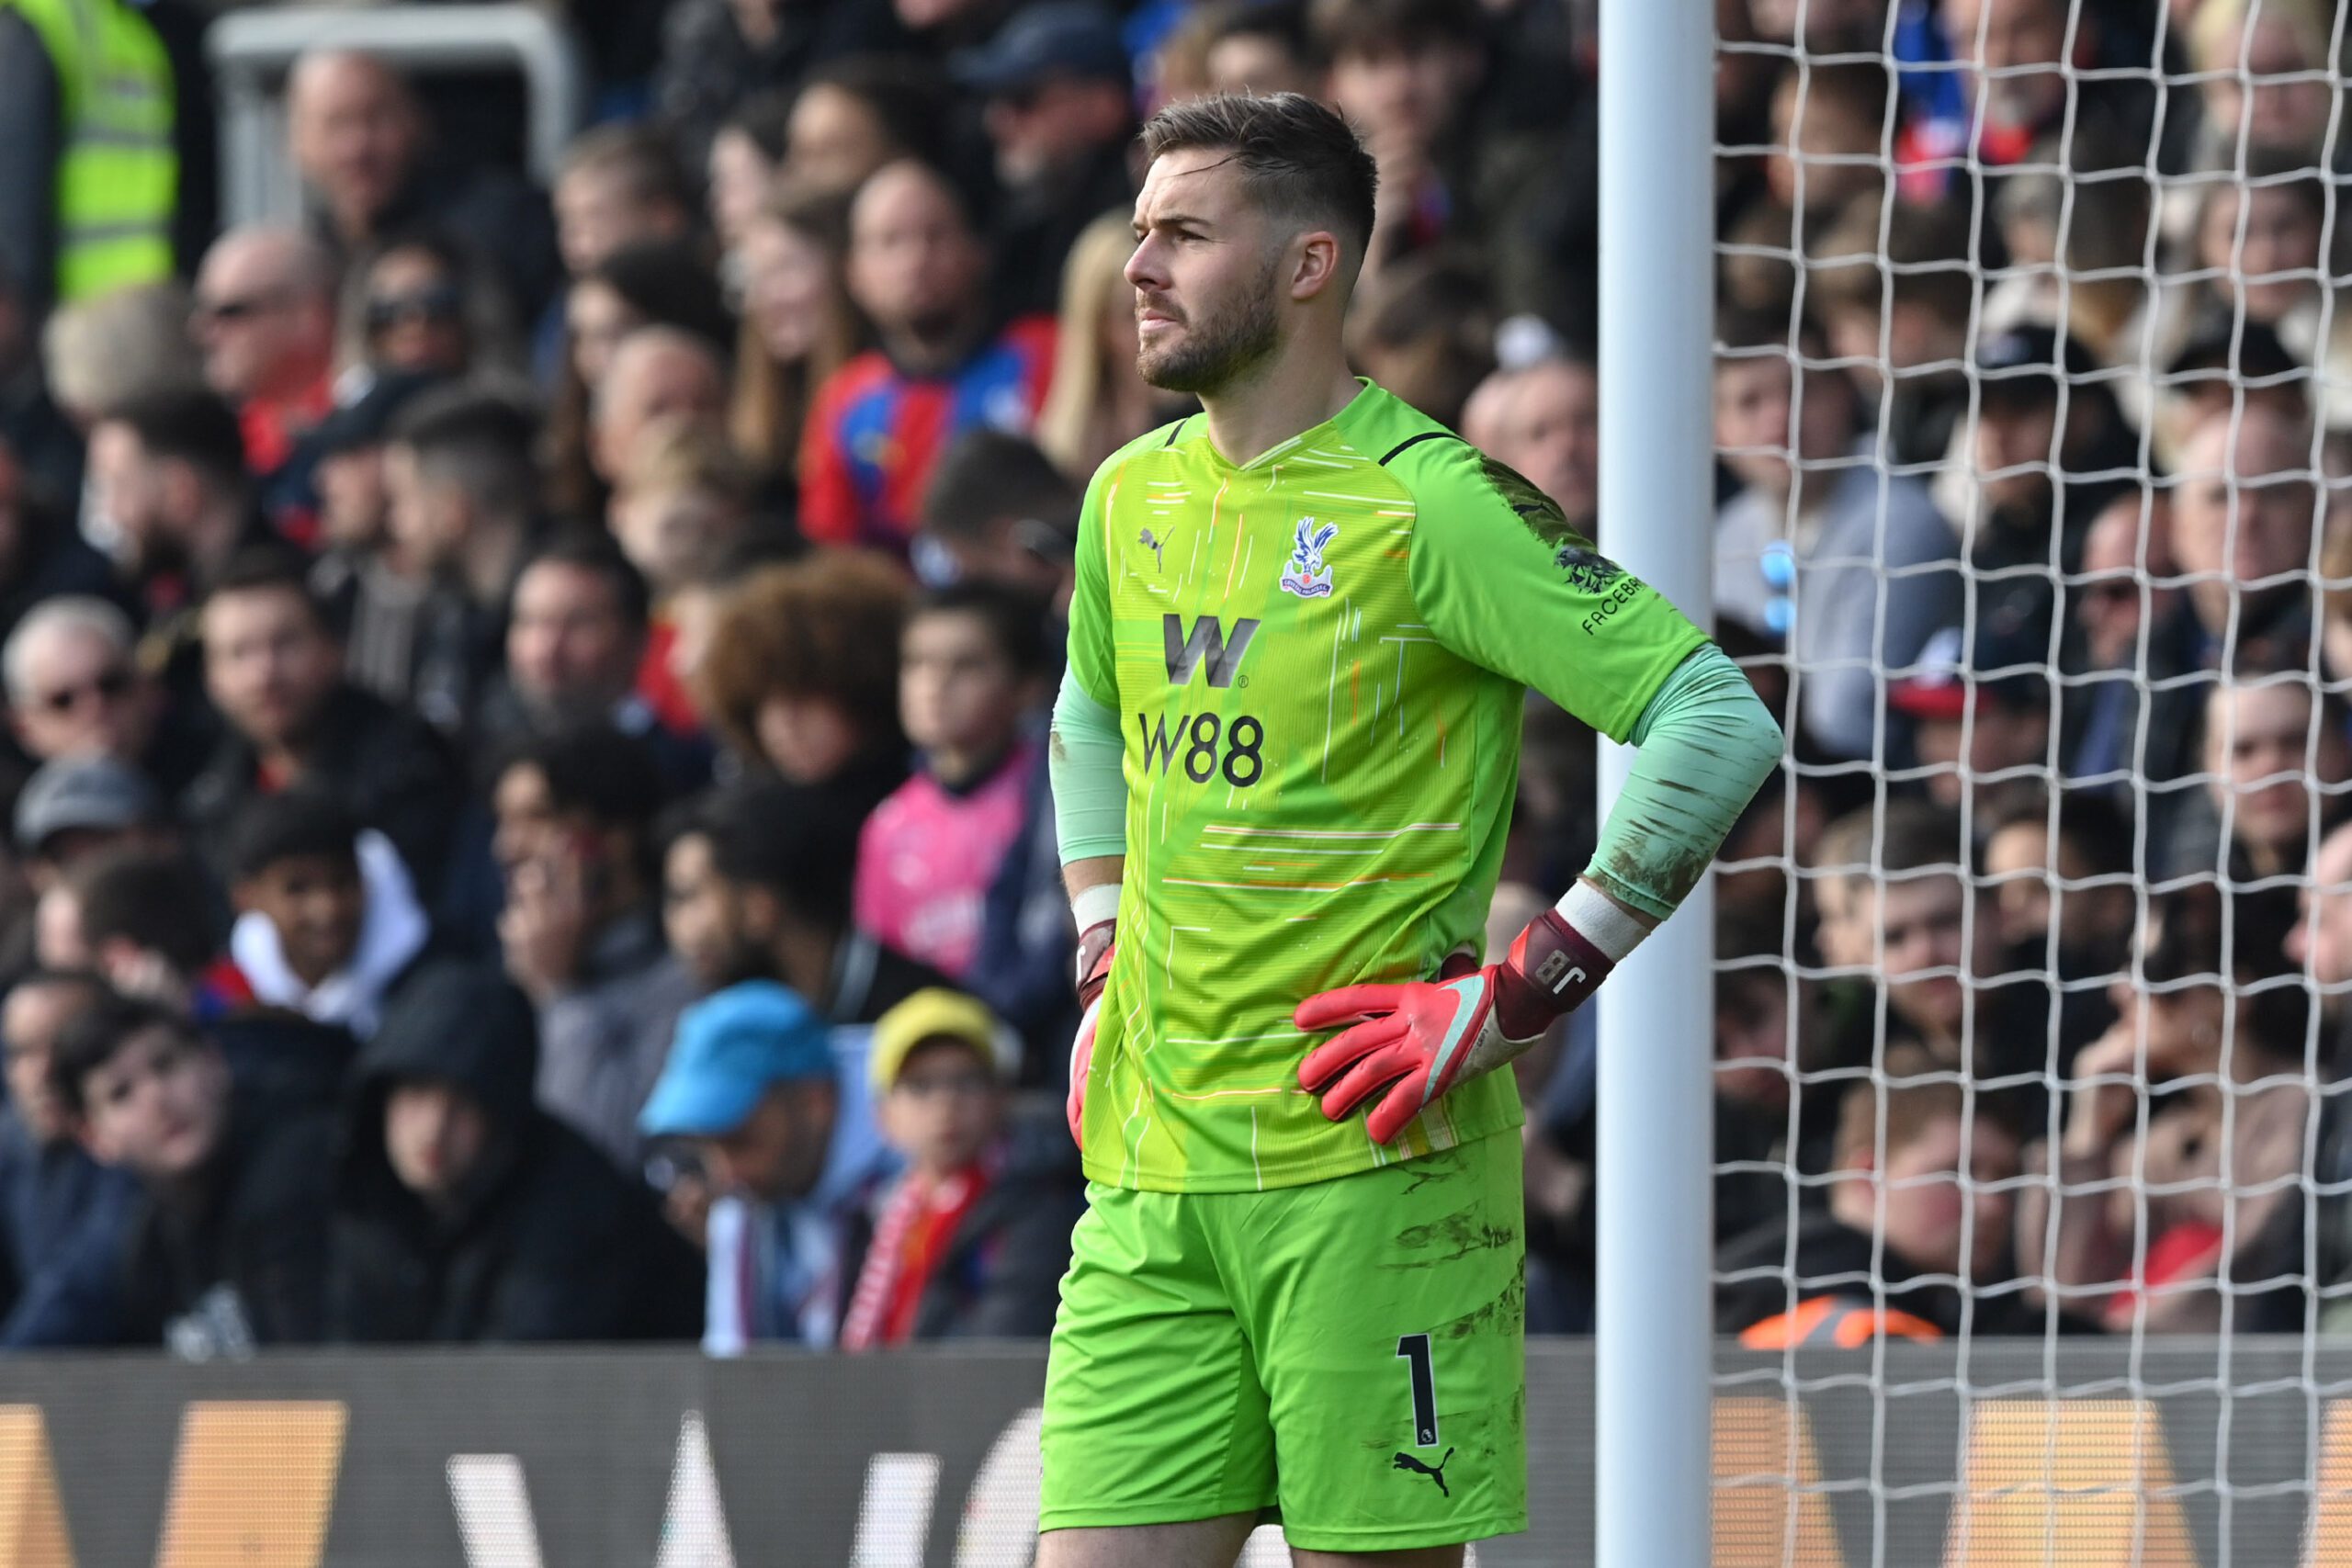 Broken fingers ruined the ‘momentum’ of Crystal Palace keeper Jack Butland – South London News